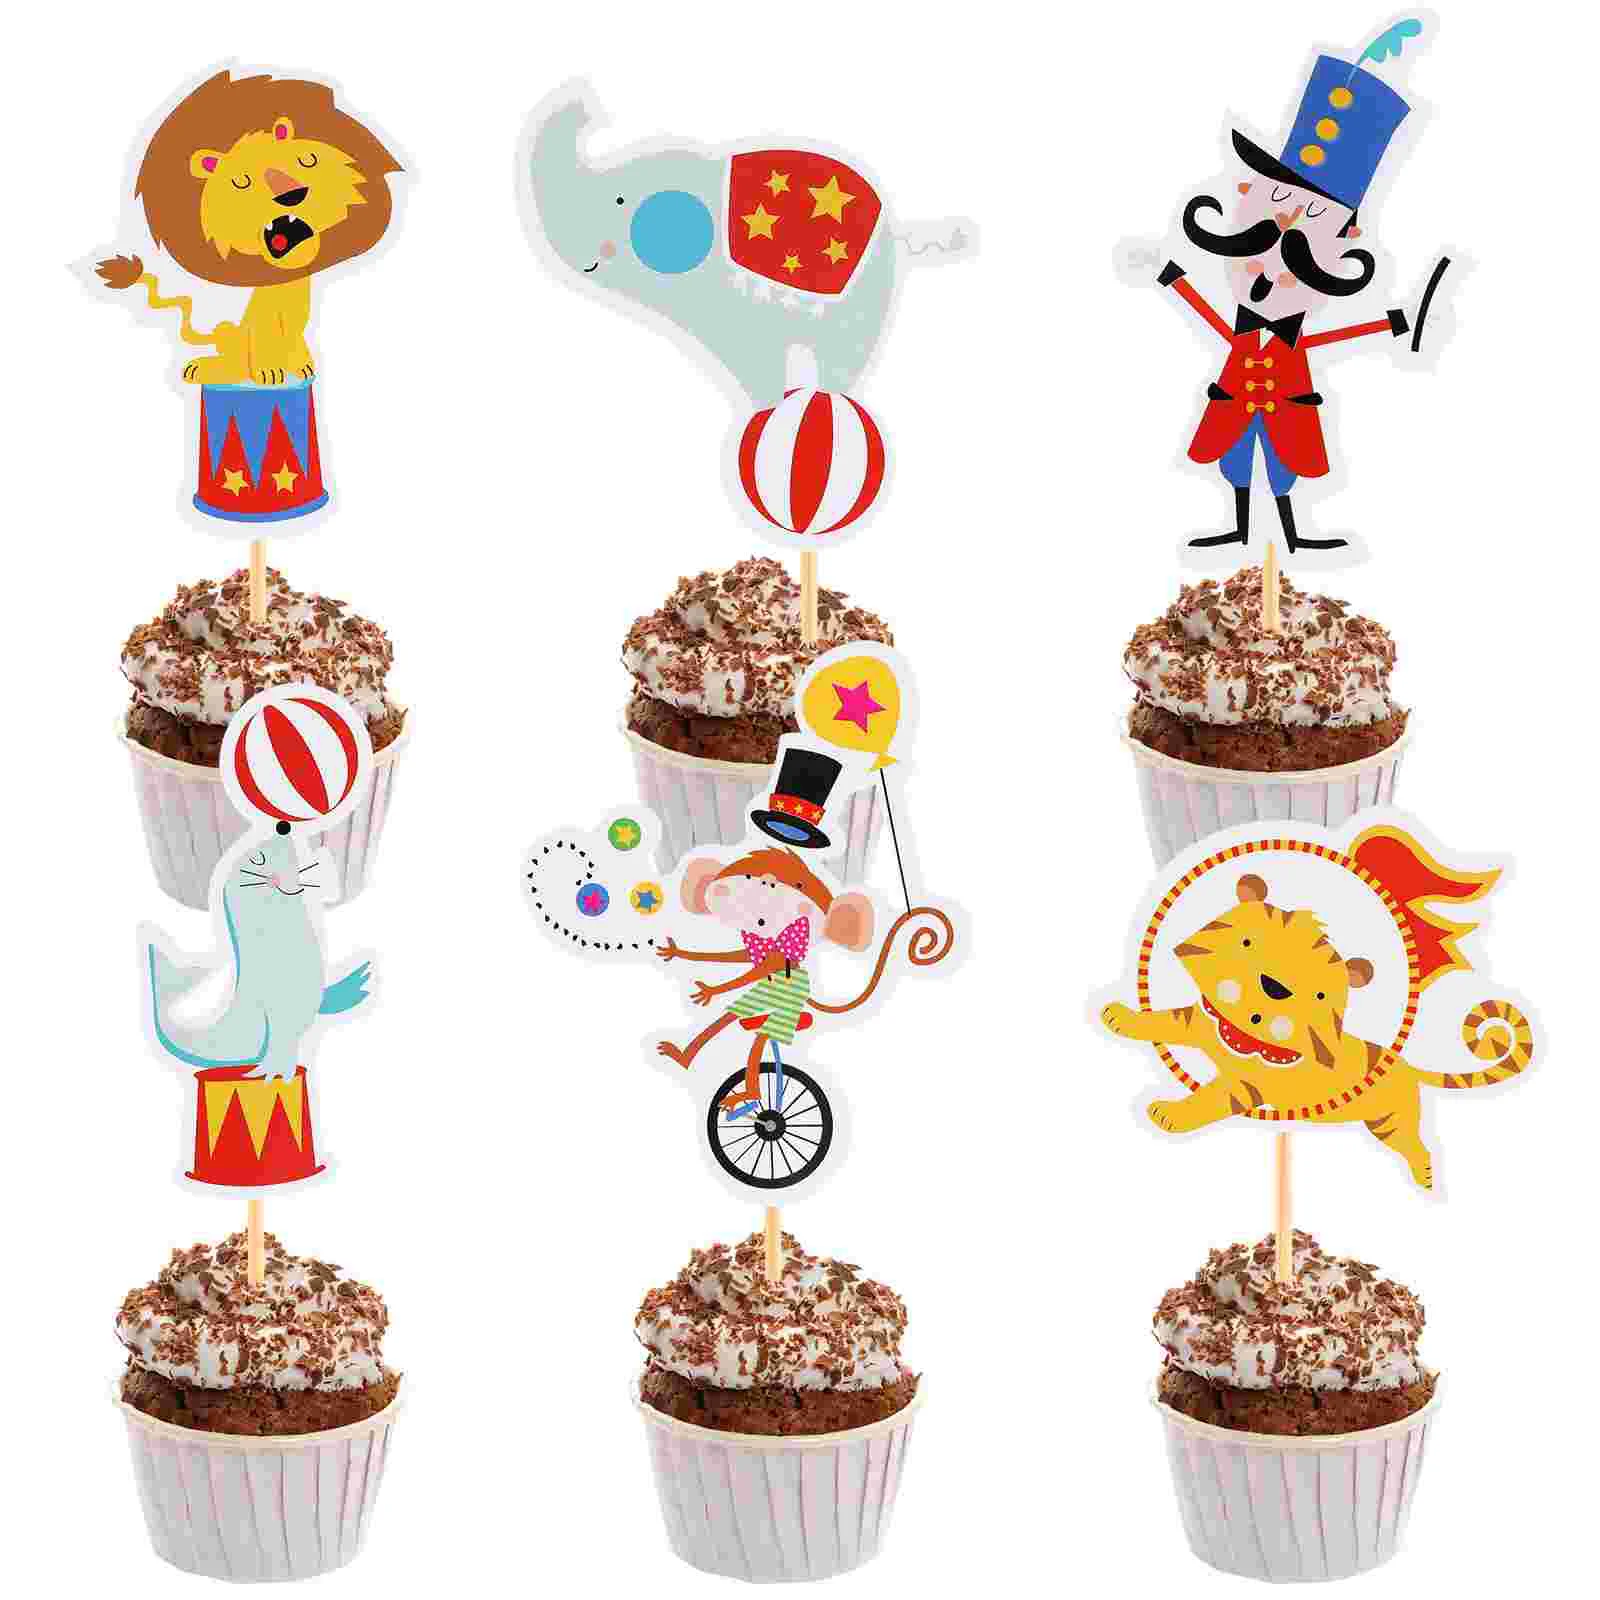 

72pcs Circus Cupcake Topper Dolphin Monkey Elephant Cupcake Muffin Picks Insert for Carnival Themed Kids Birthday Party Favor